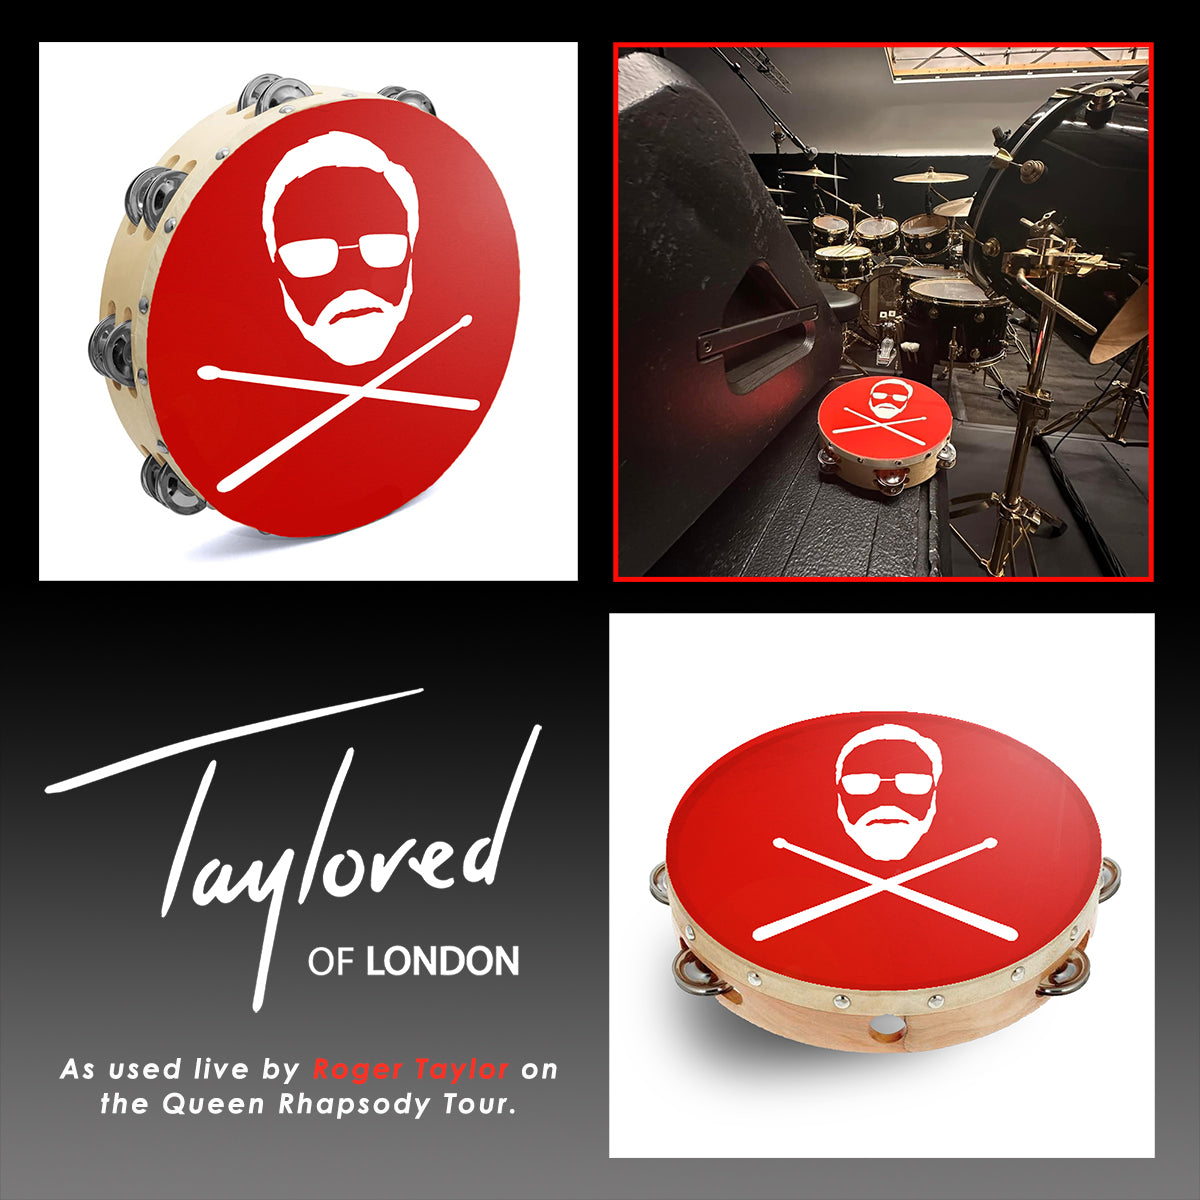 Roger Taylor - Limited Edition 'Taylored' Tambourine